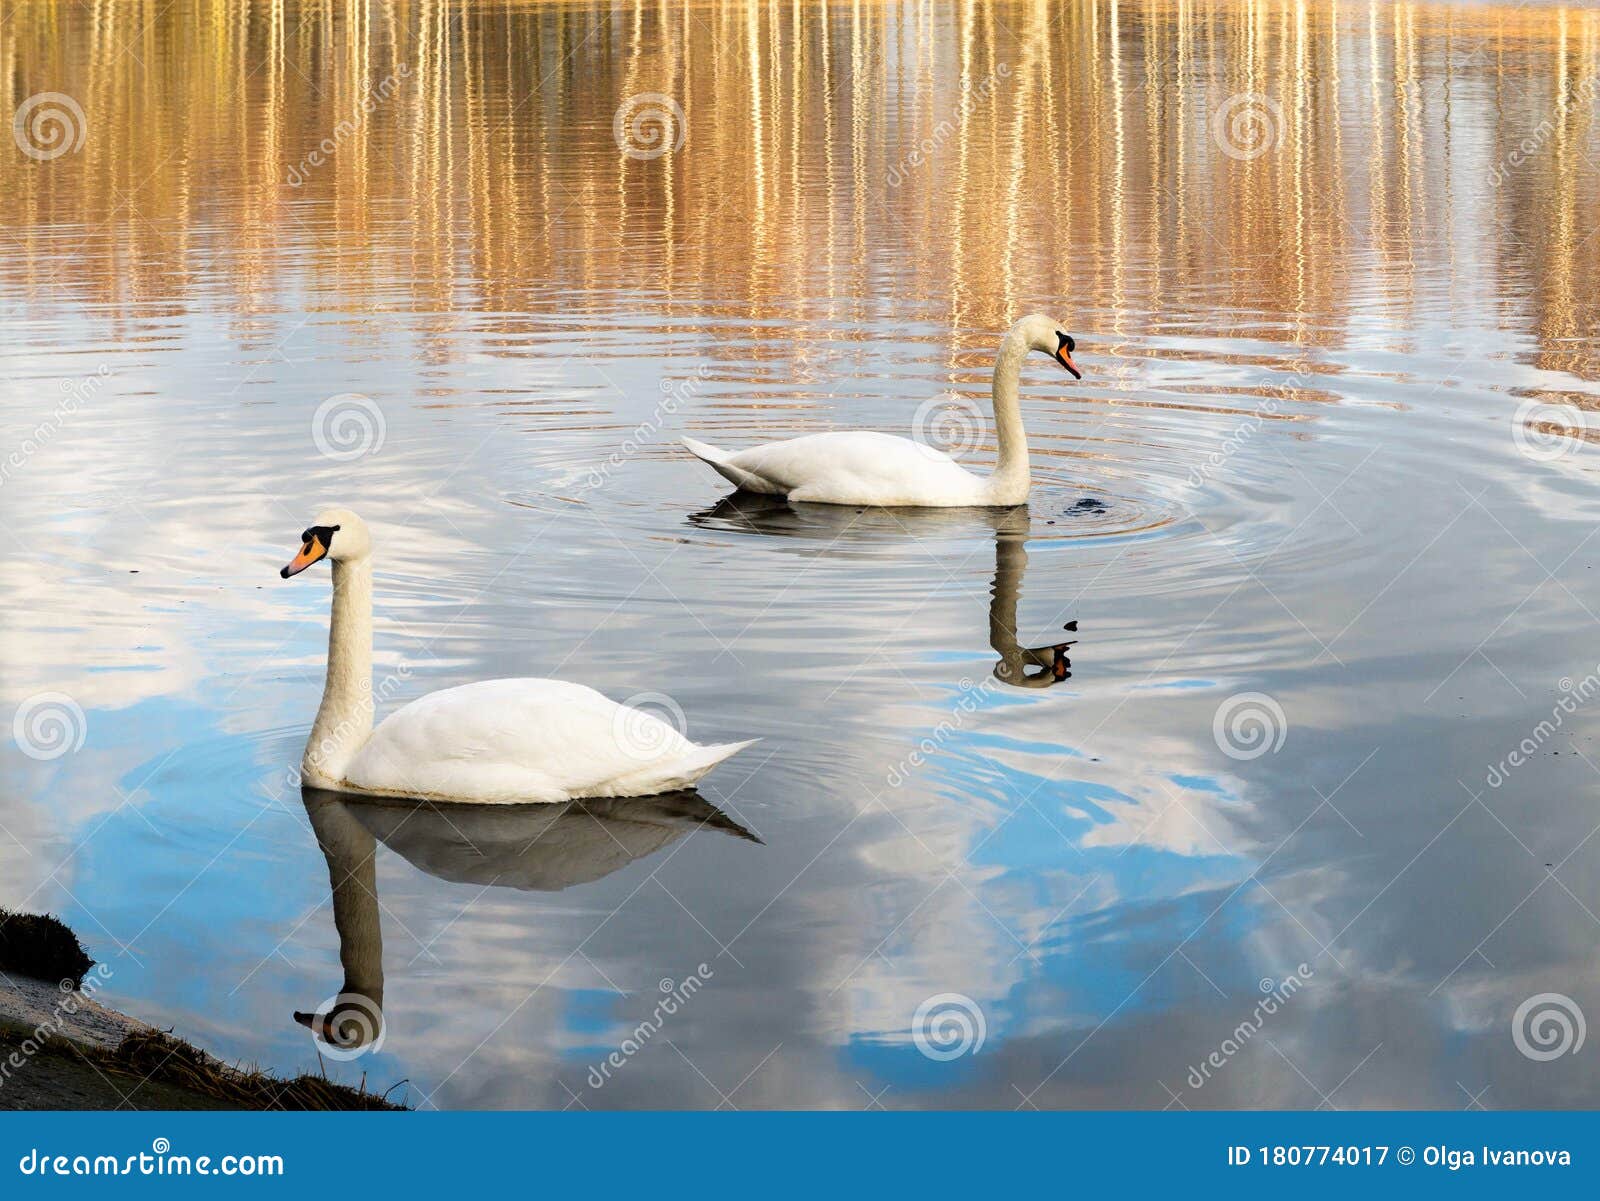 morning with swans in early spring